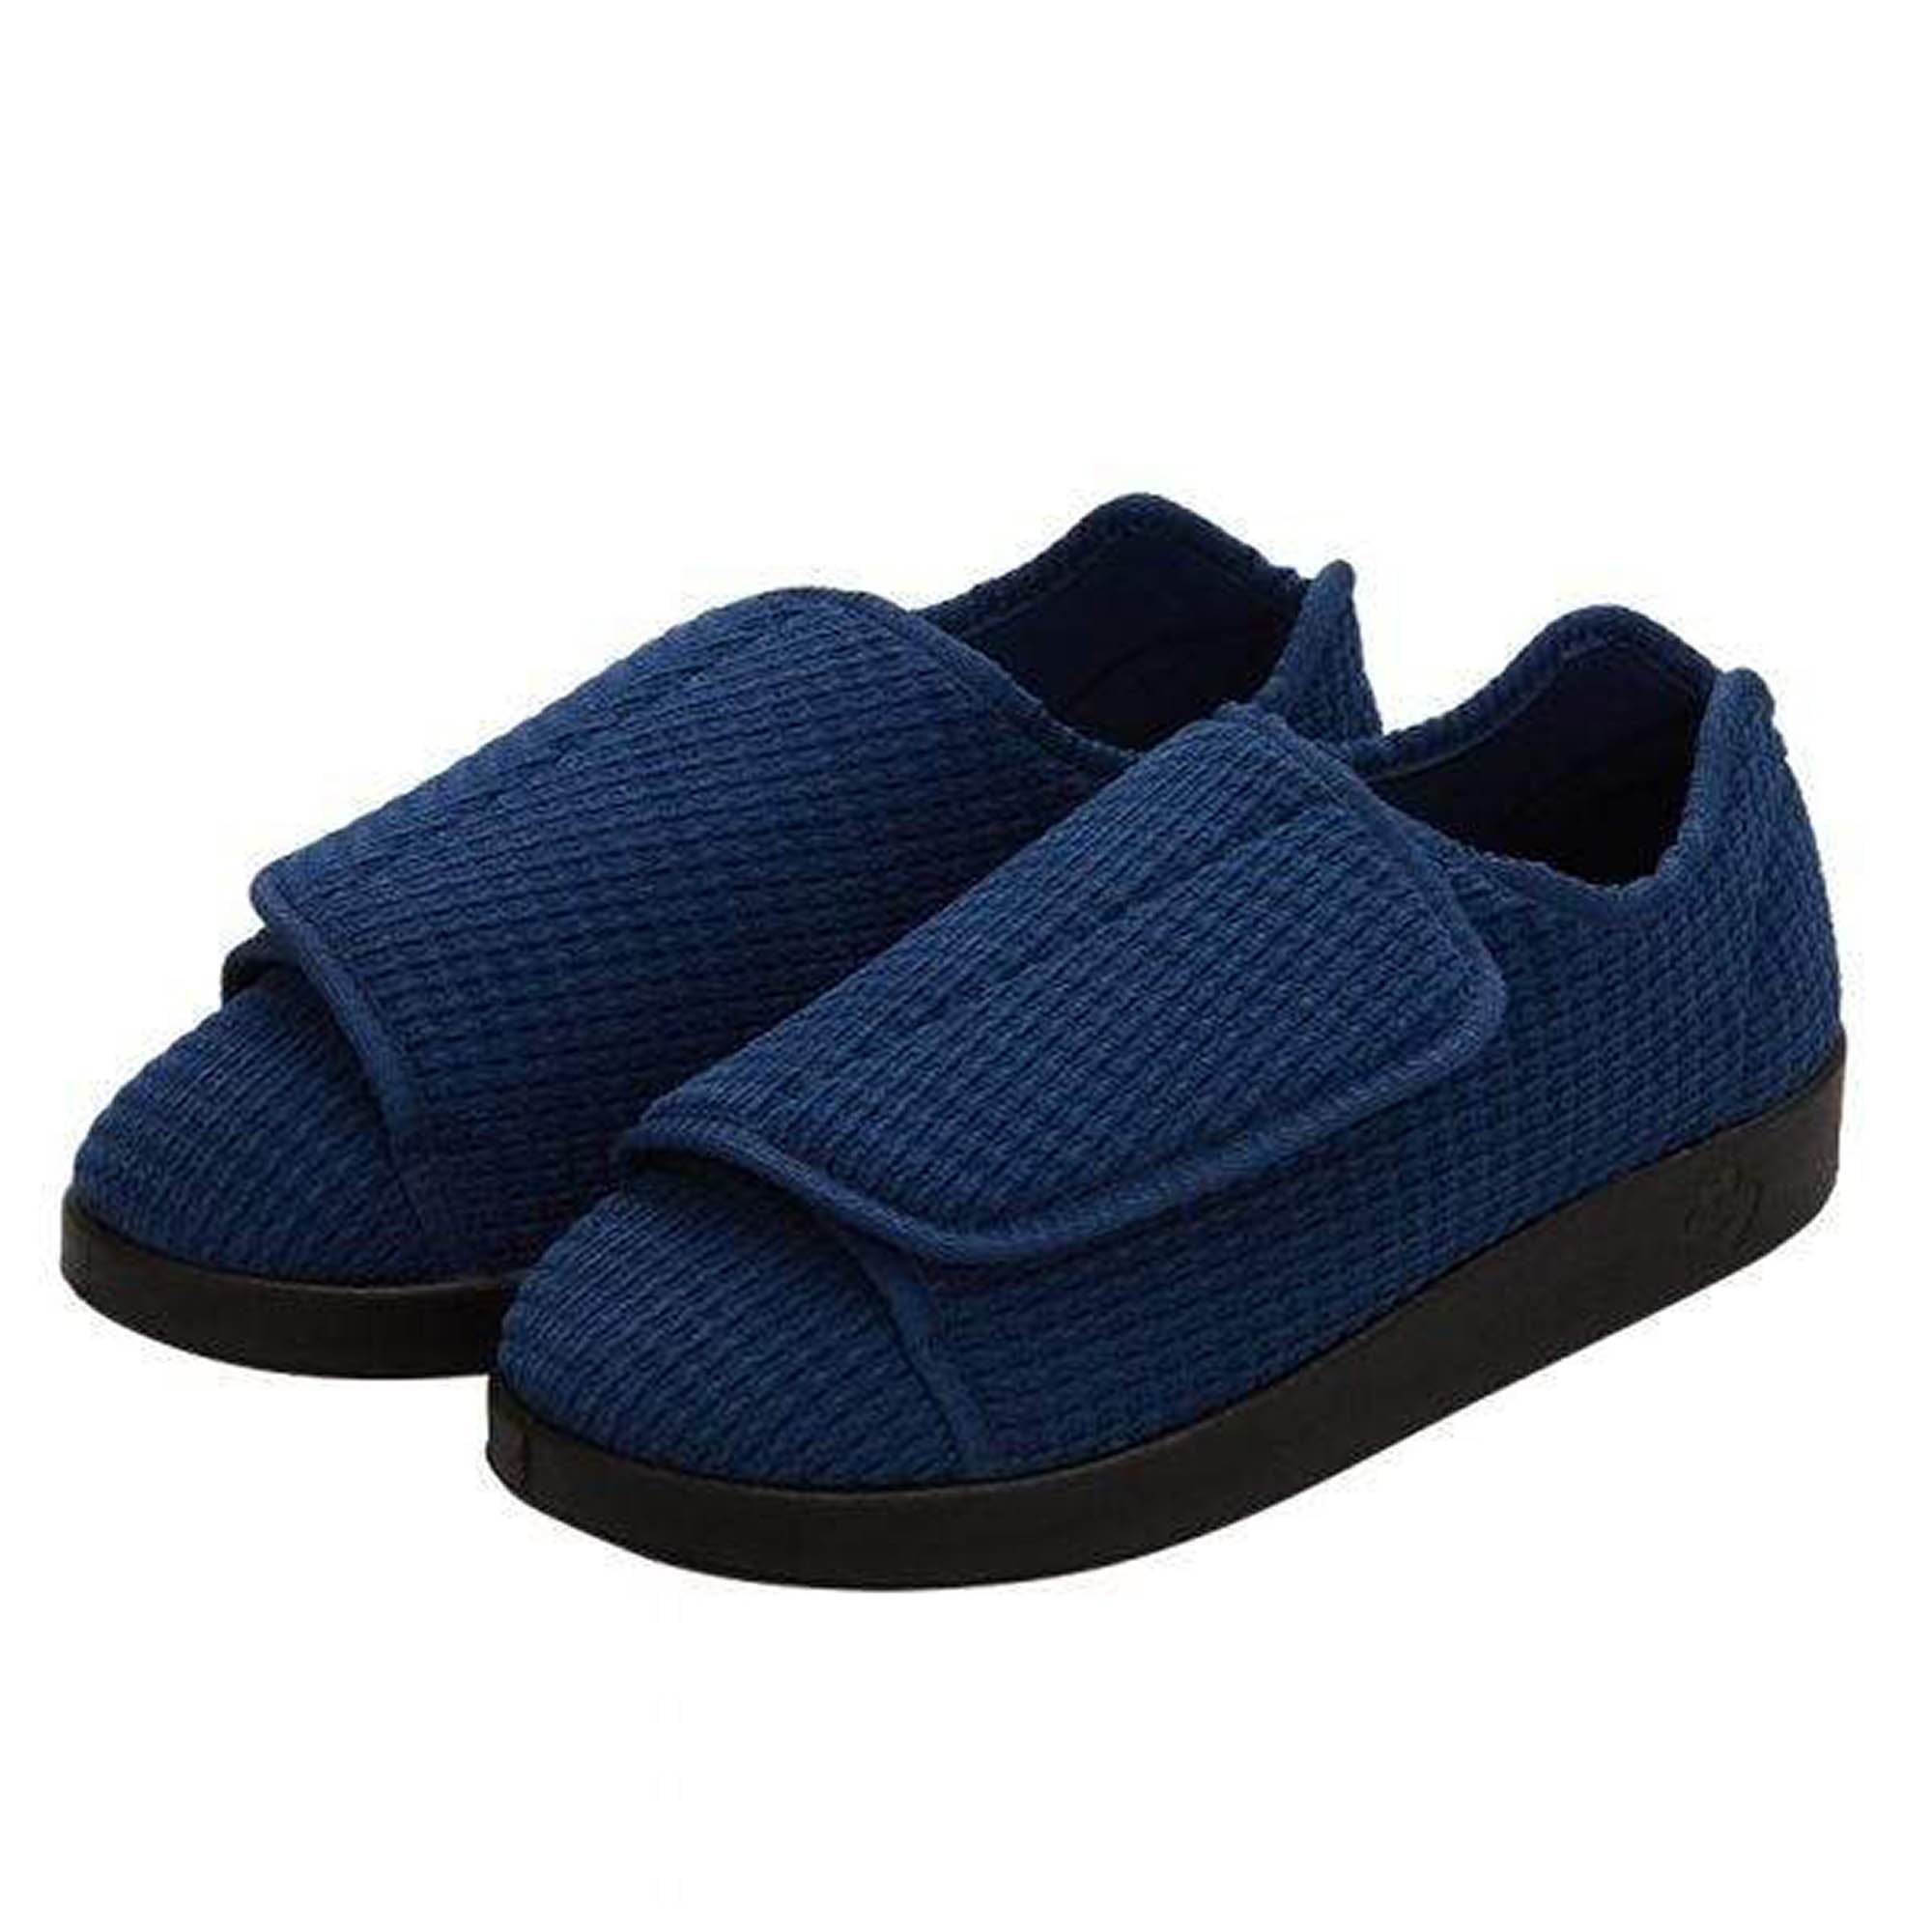 Silverts Men's Extra Extra Wide Slip-Resistant Slippers - Black - 8